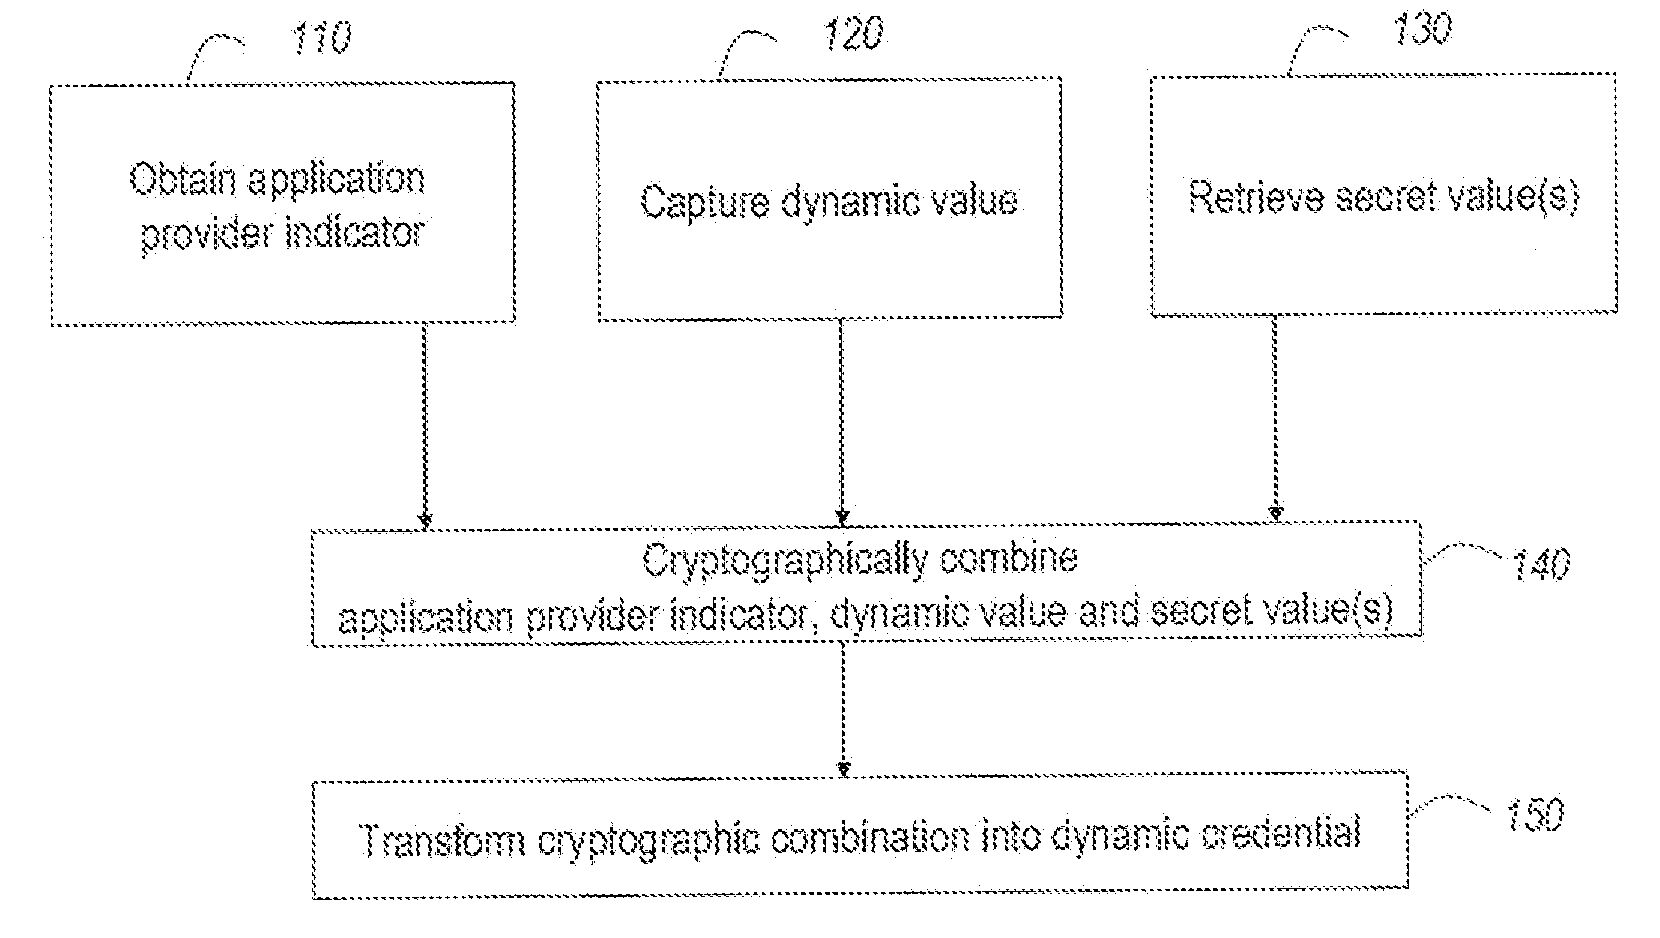 Strong authentication token usable with a plurality of independent application providers